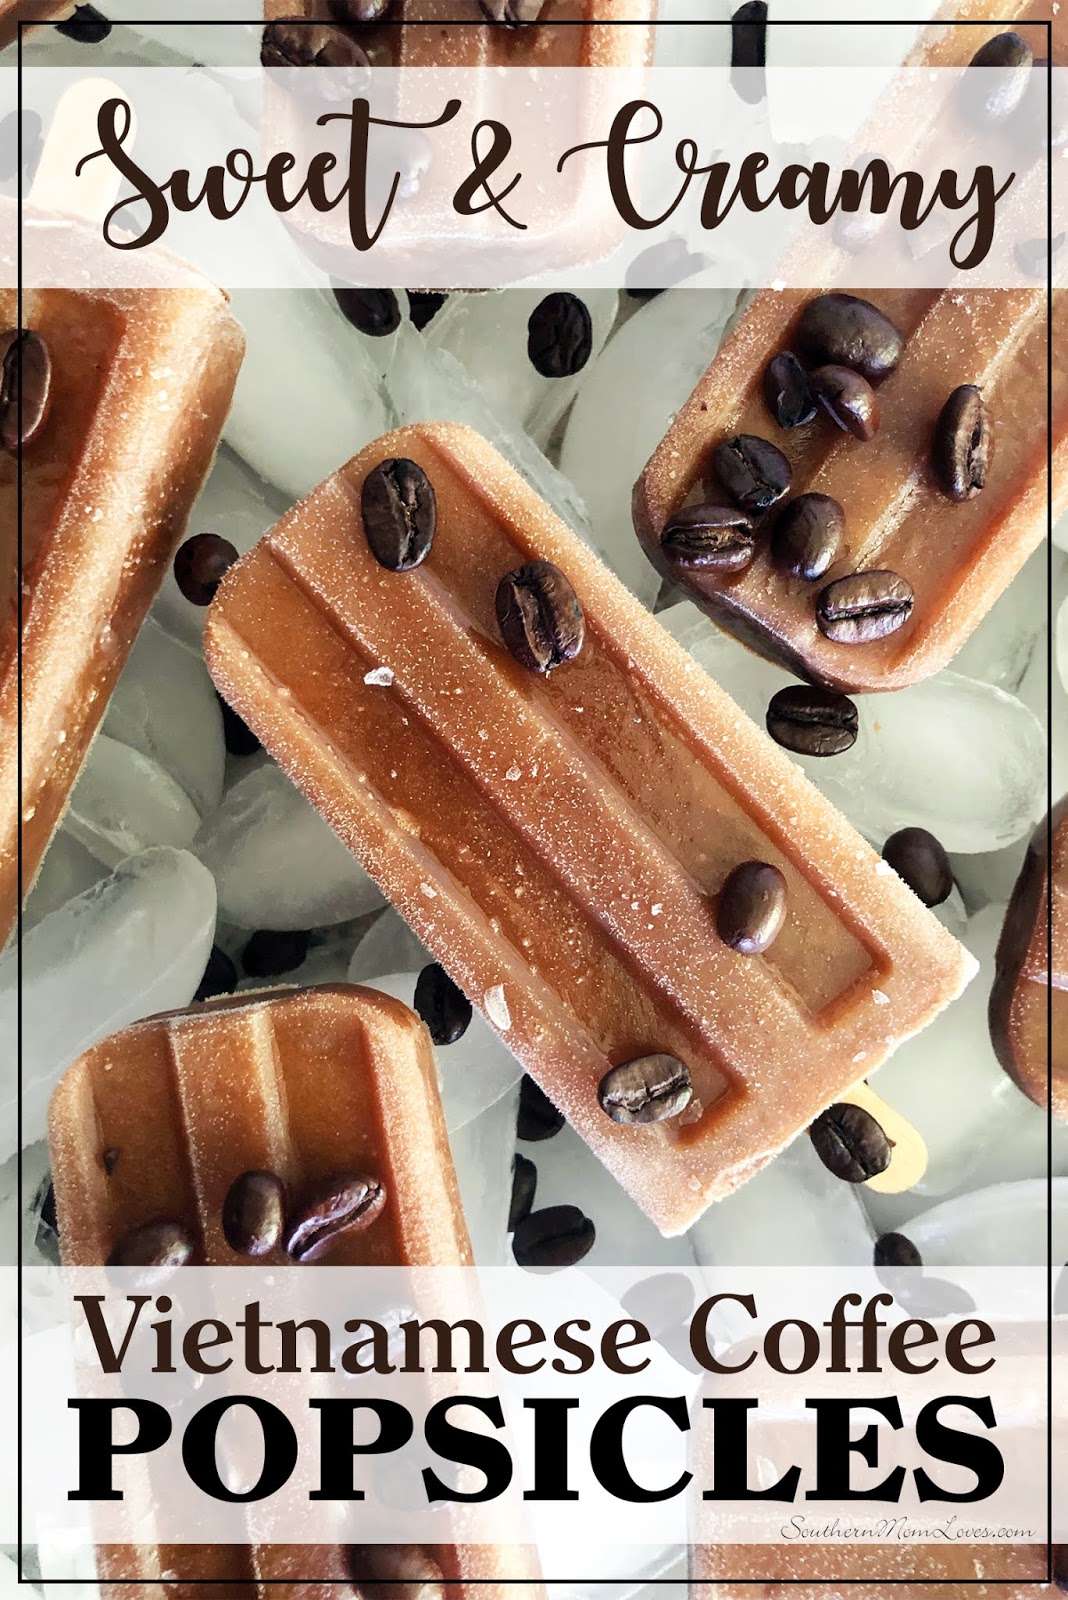 Southern Mom Loves: Sweet & Creamy Vietnamese Coffee Popsicles!